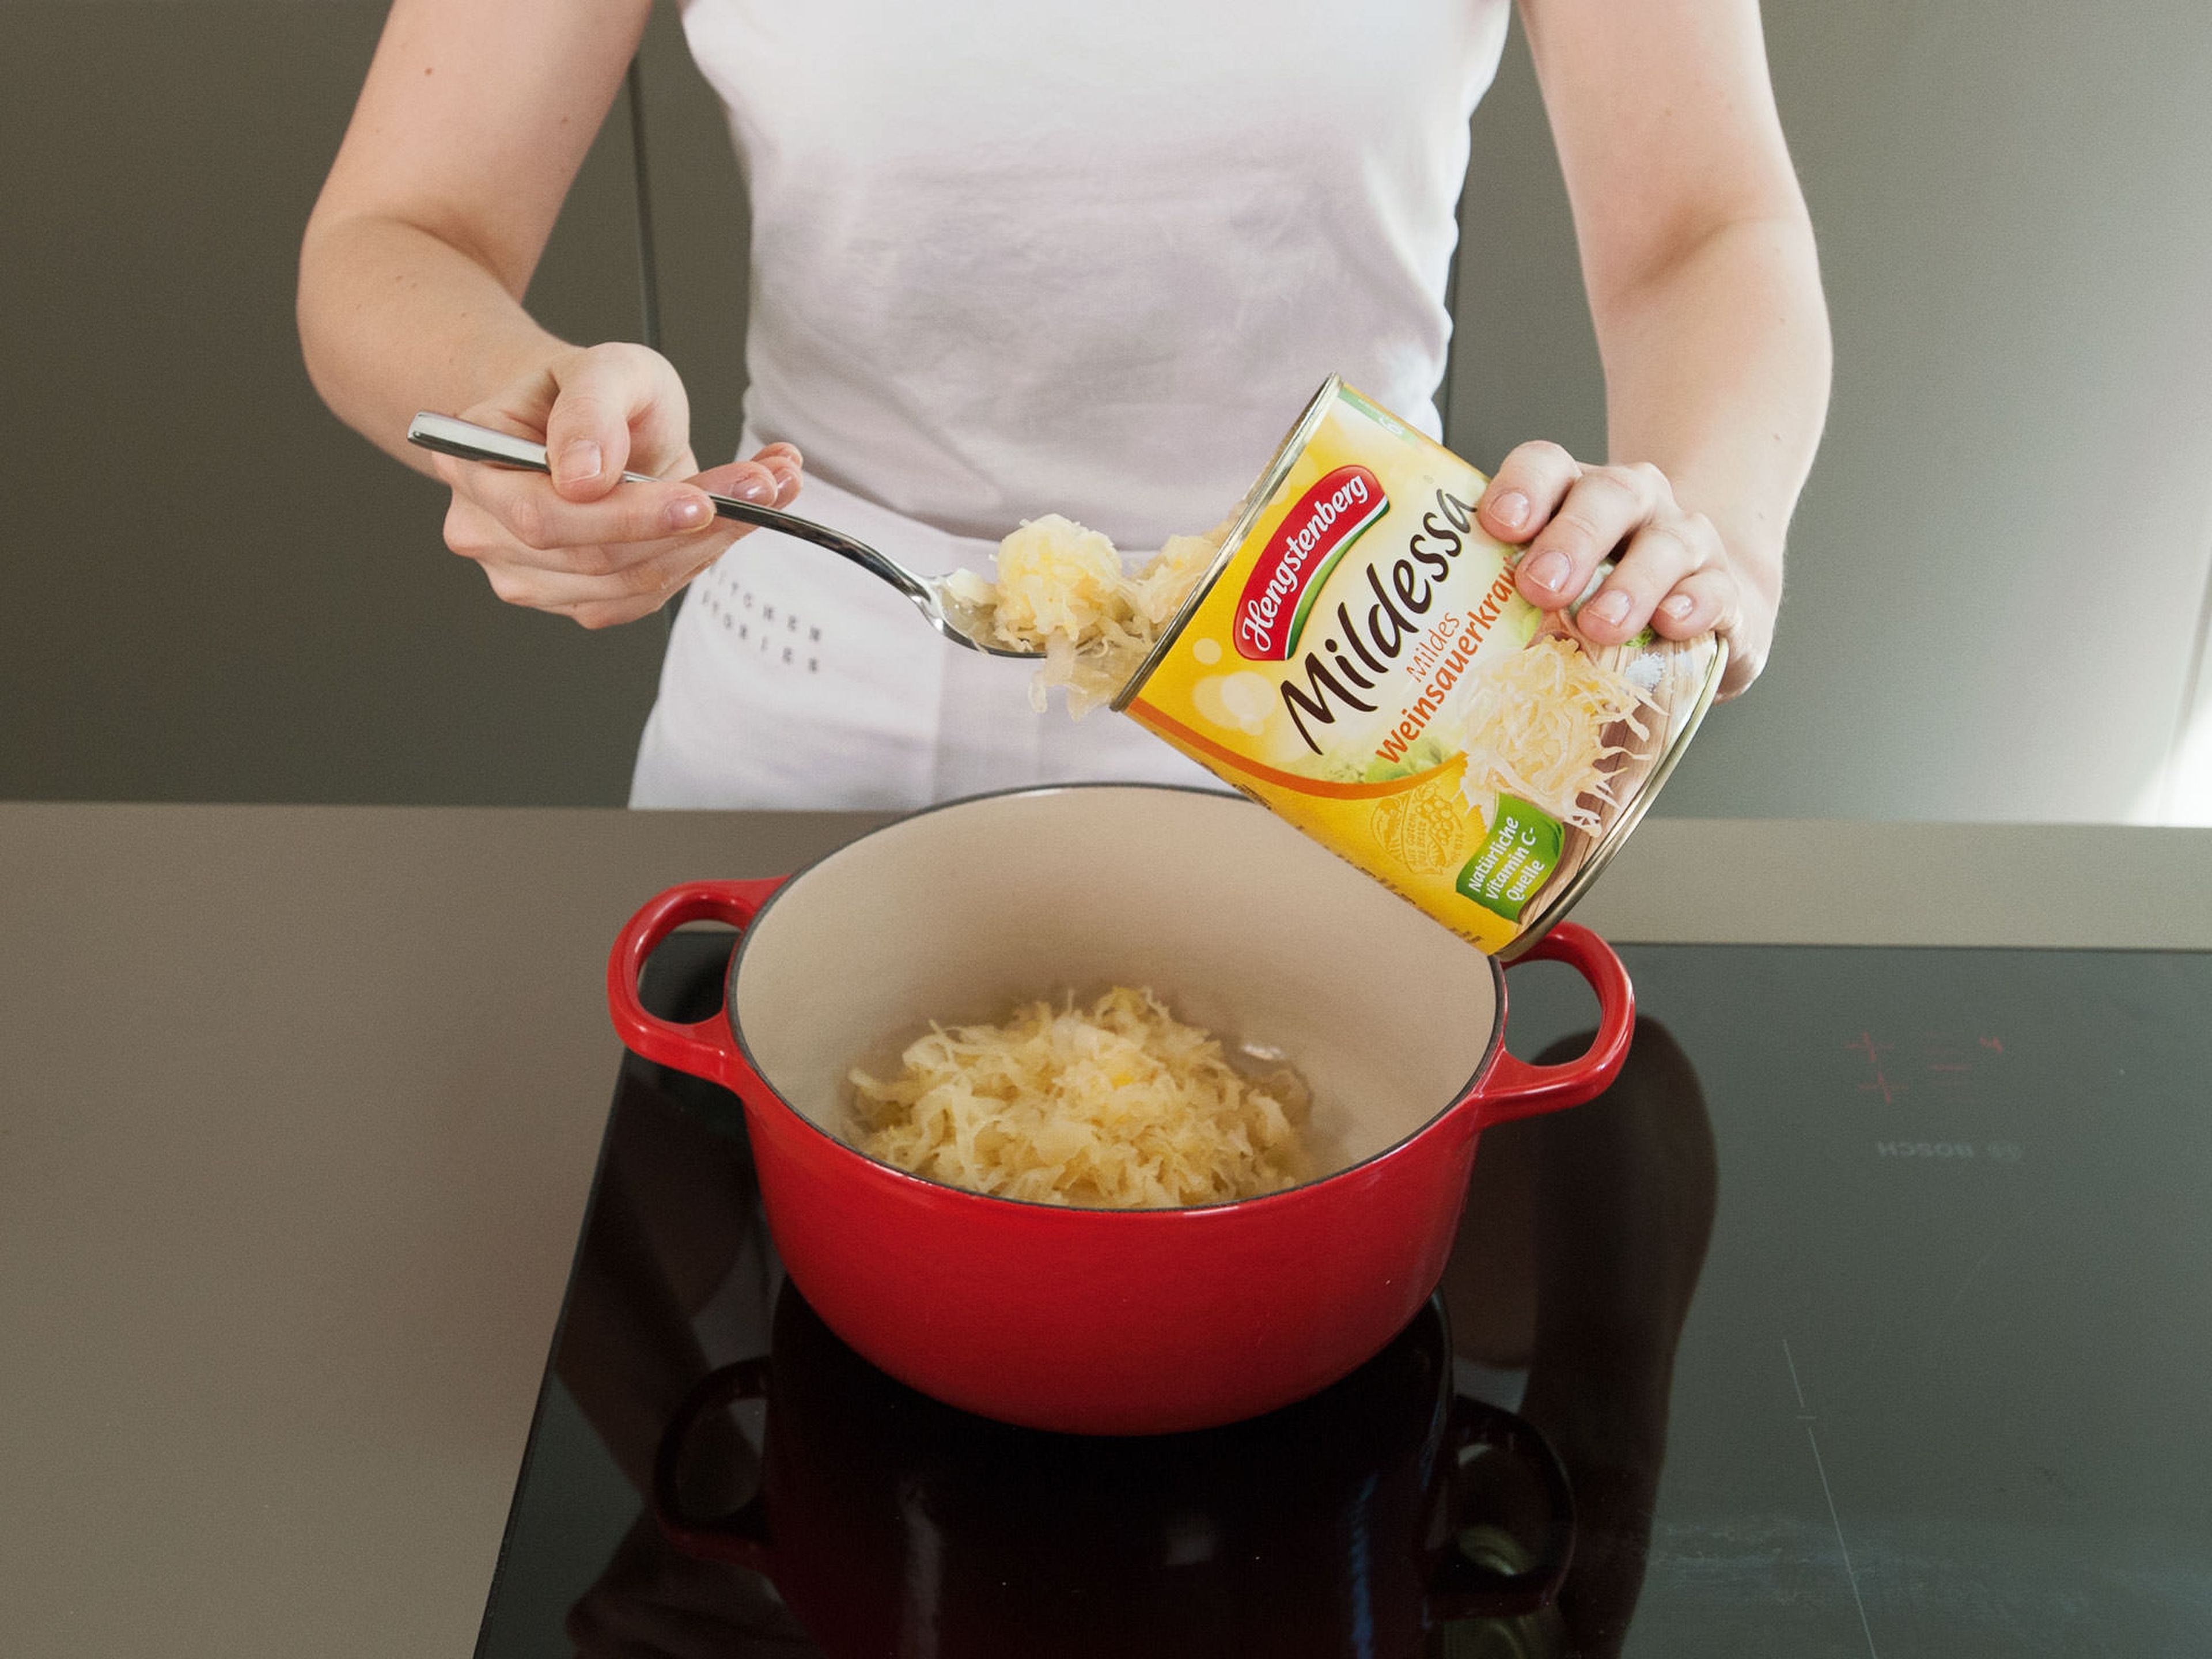 Preheat oven to 80°C/175°F. Pat kassler dry with a towel. Add sauerkraut to a small saucepan with veal stock and kassler and bring to a boil. Cover and transfer to preheated oven and bake at 80°C/175°F for approx. 25 – 30 min.